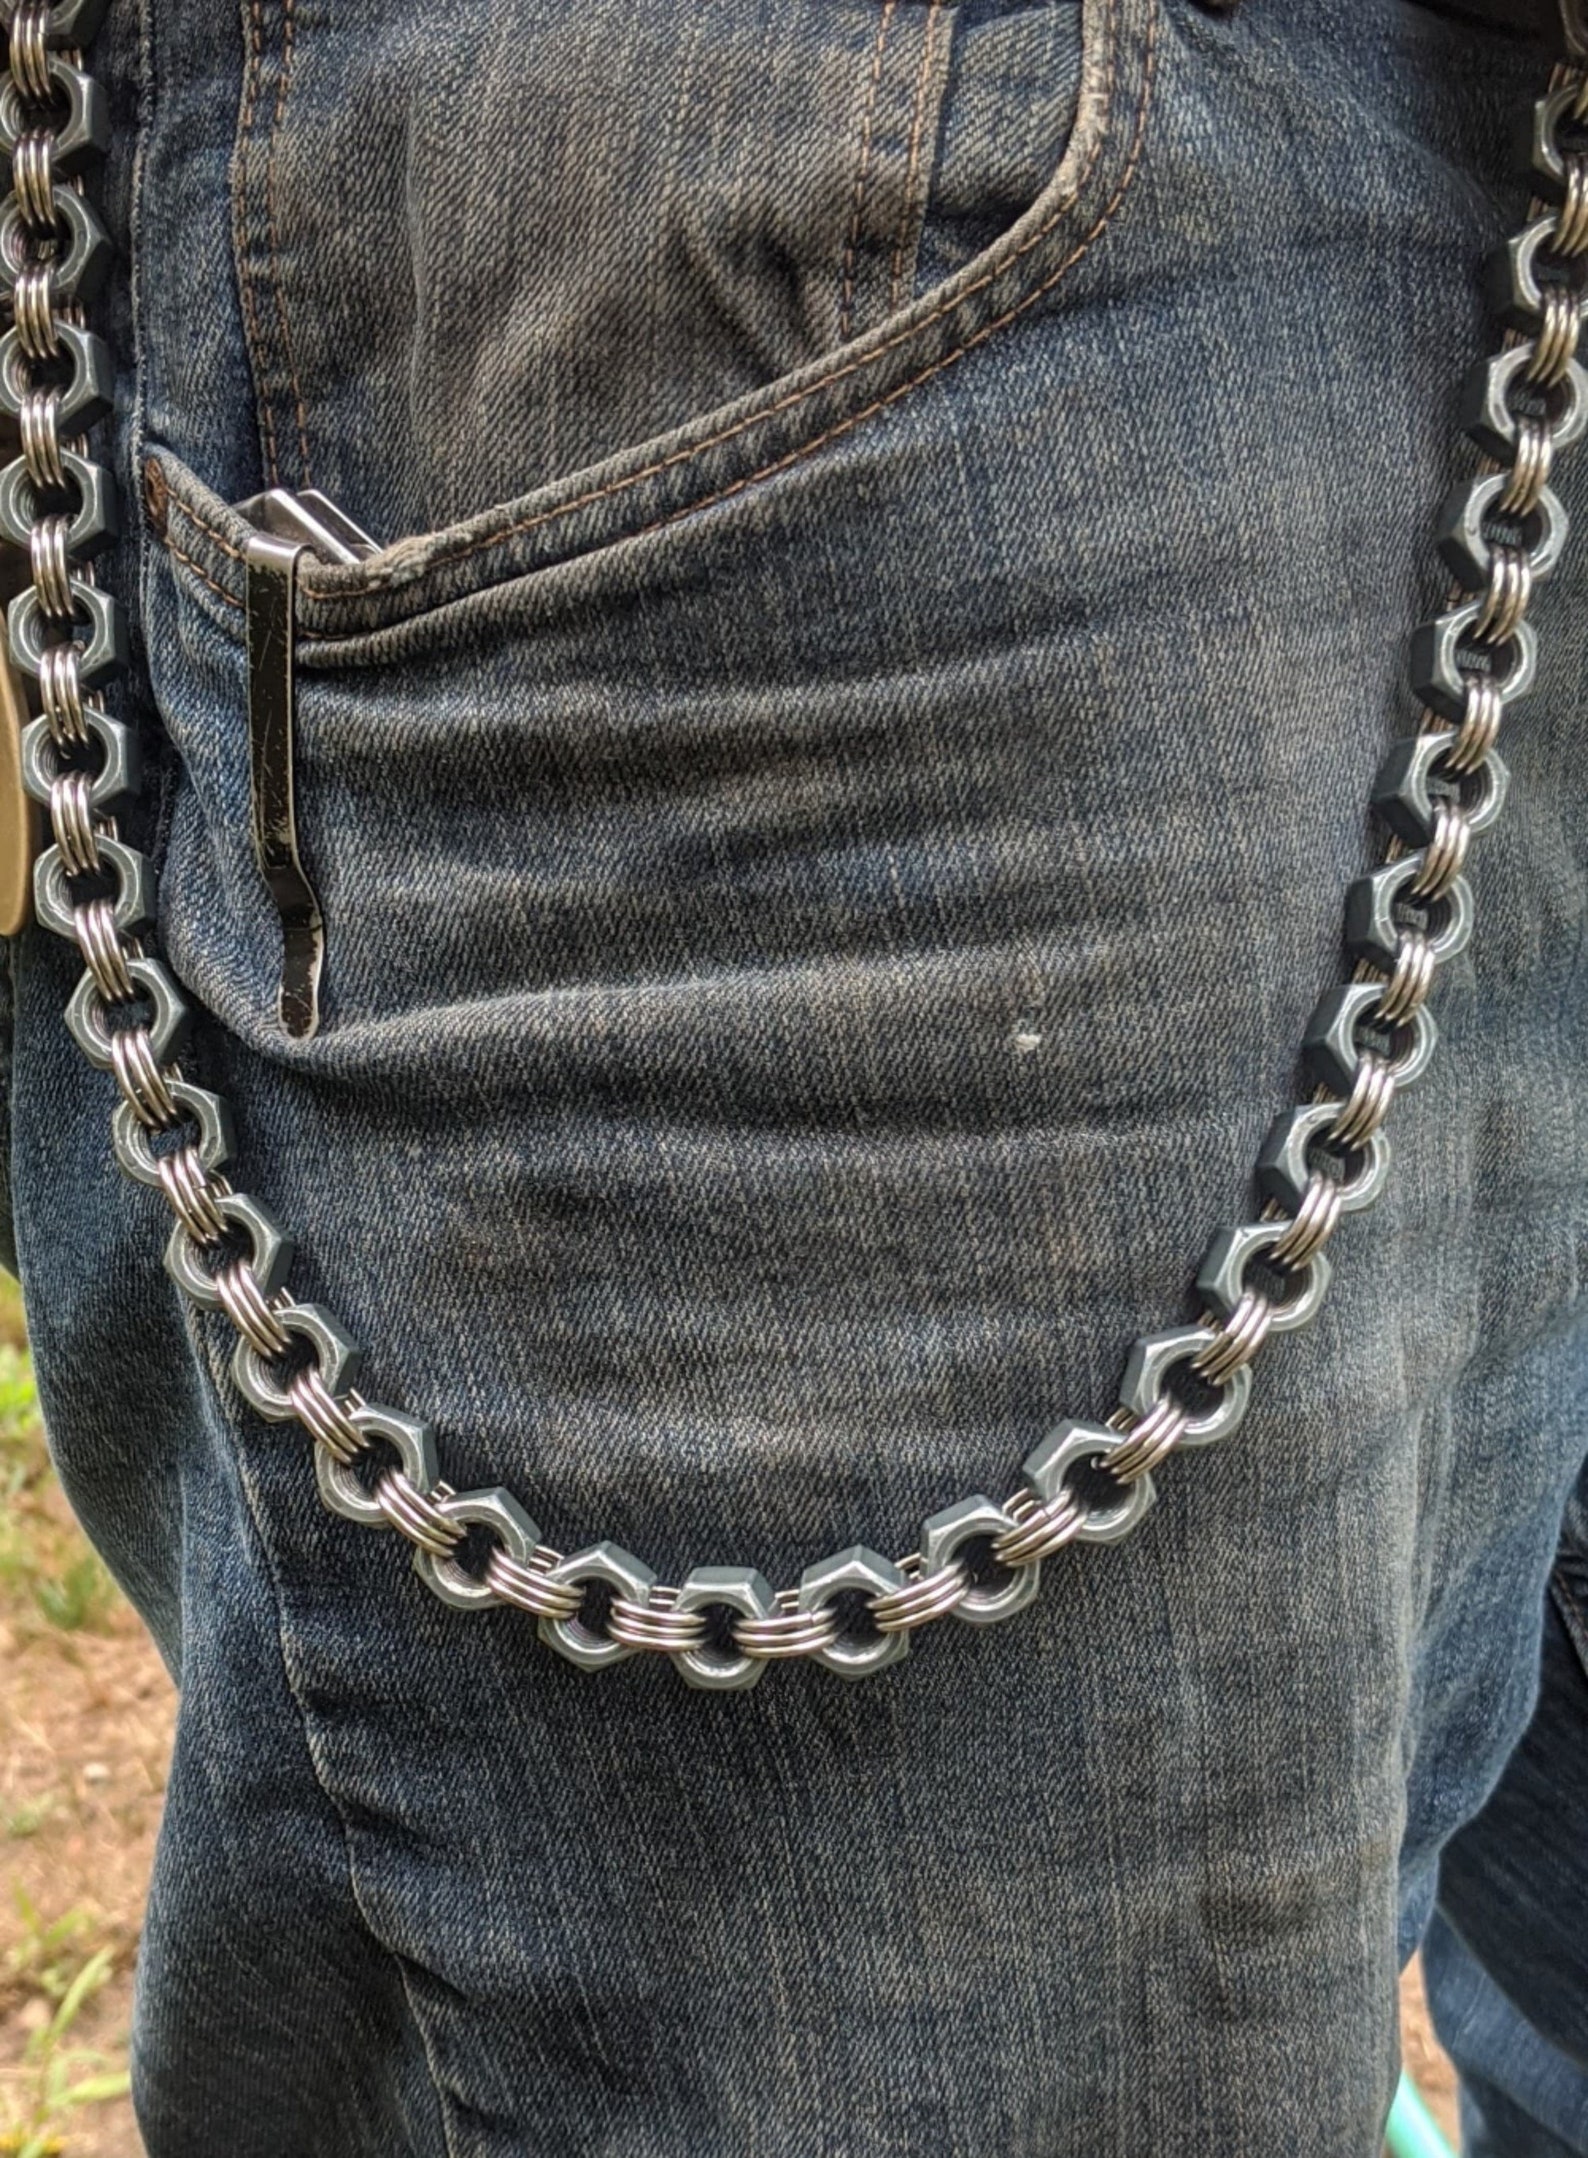 Stainless Nut Wallet Chain - Etsy